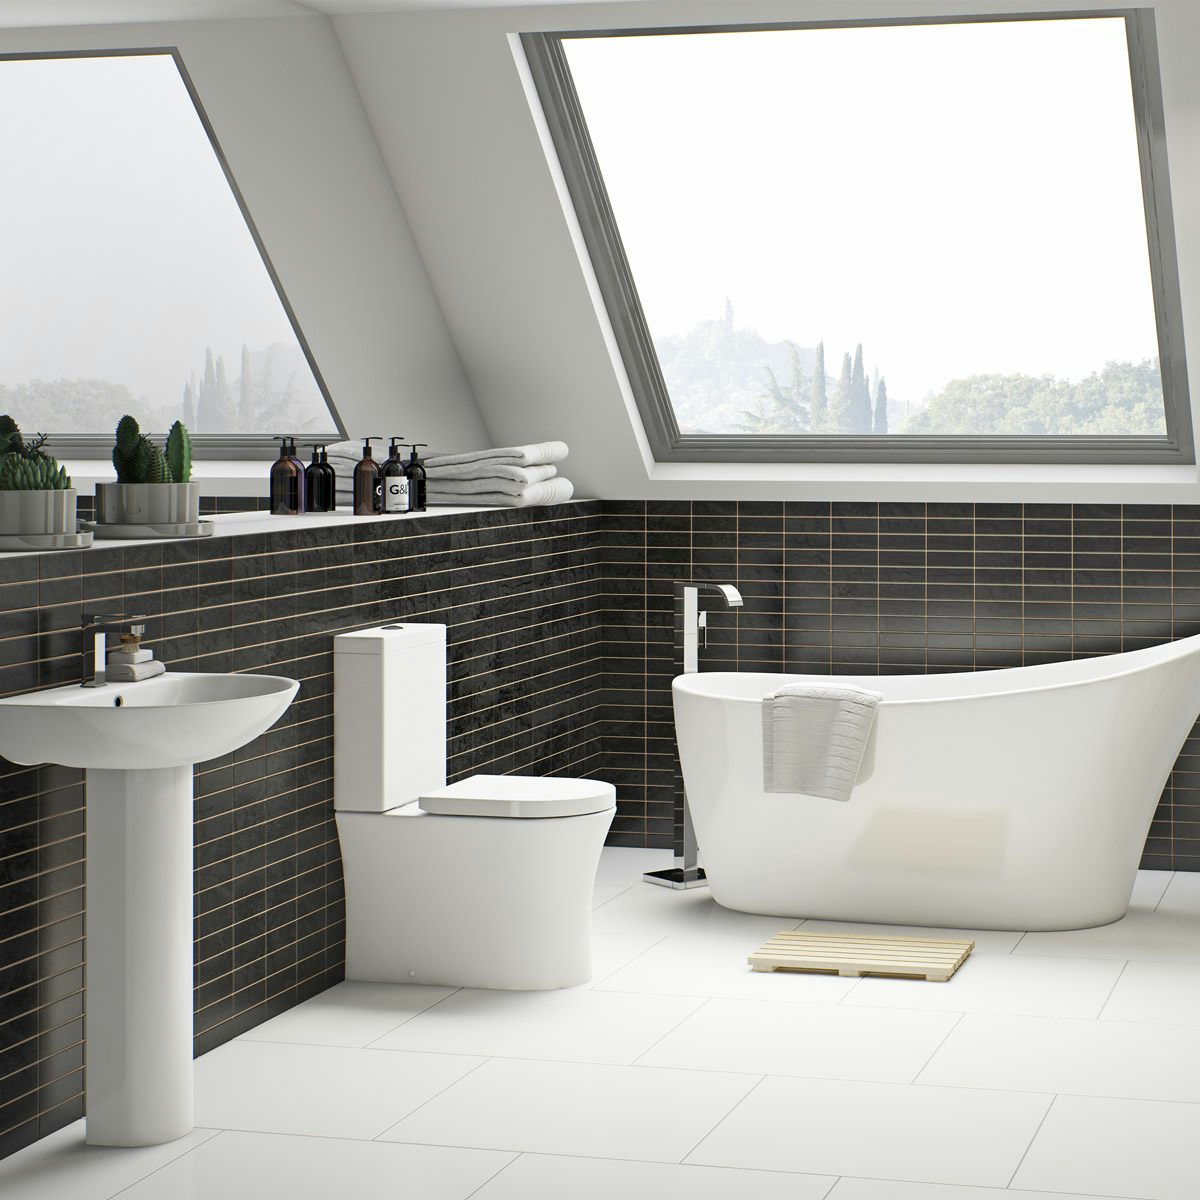 Mode Hardy rimless complete bathroom suite with freestanding bath and taps